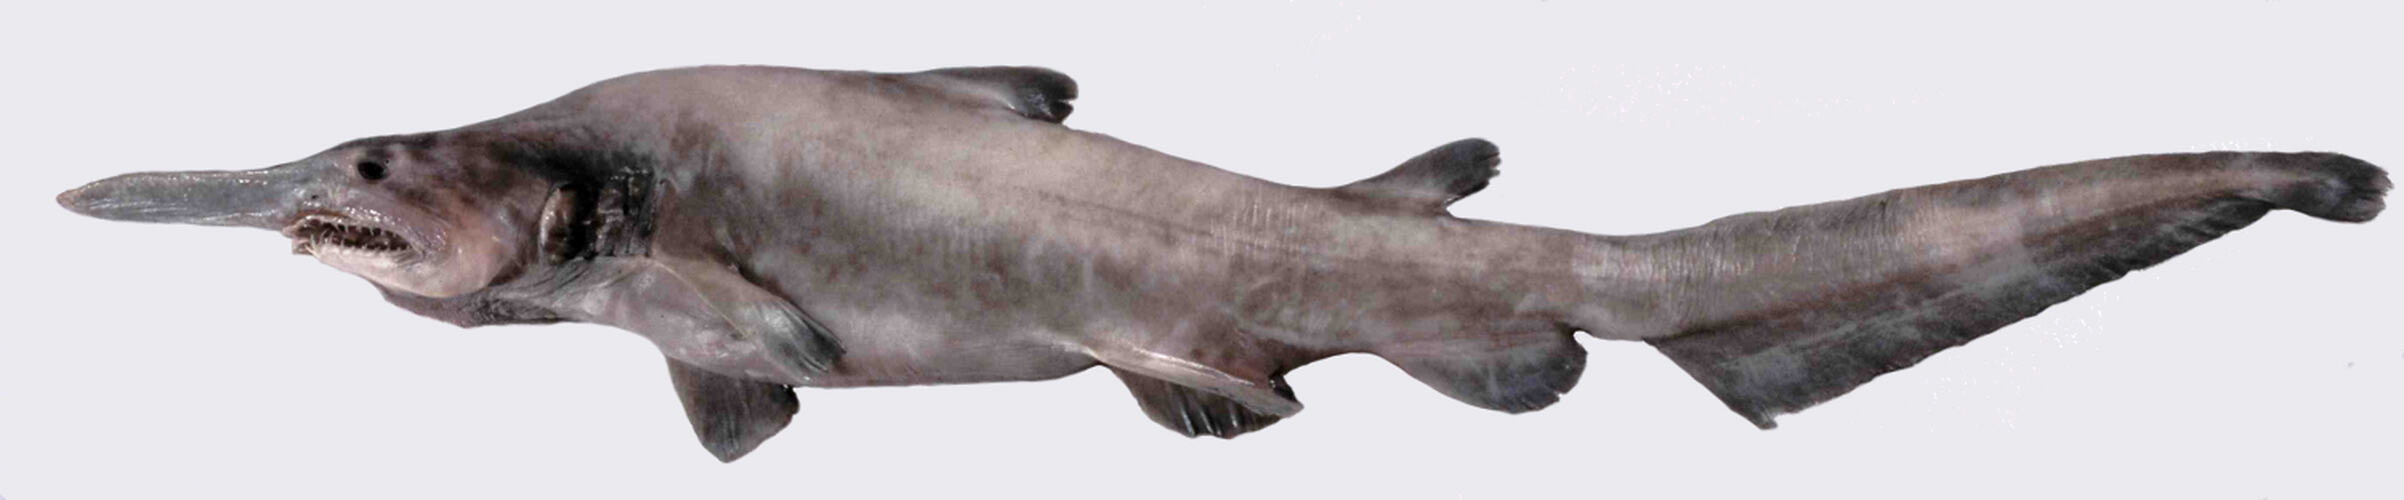 Side view of shark with long, pointed nose.